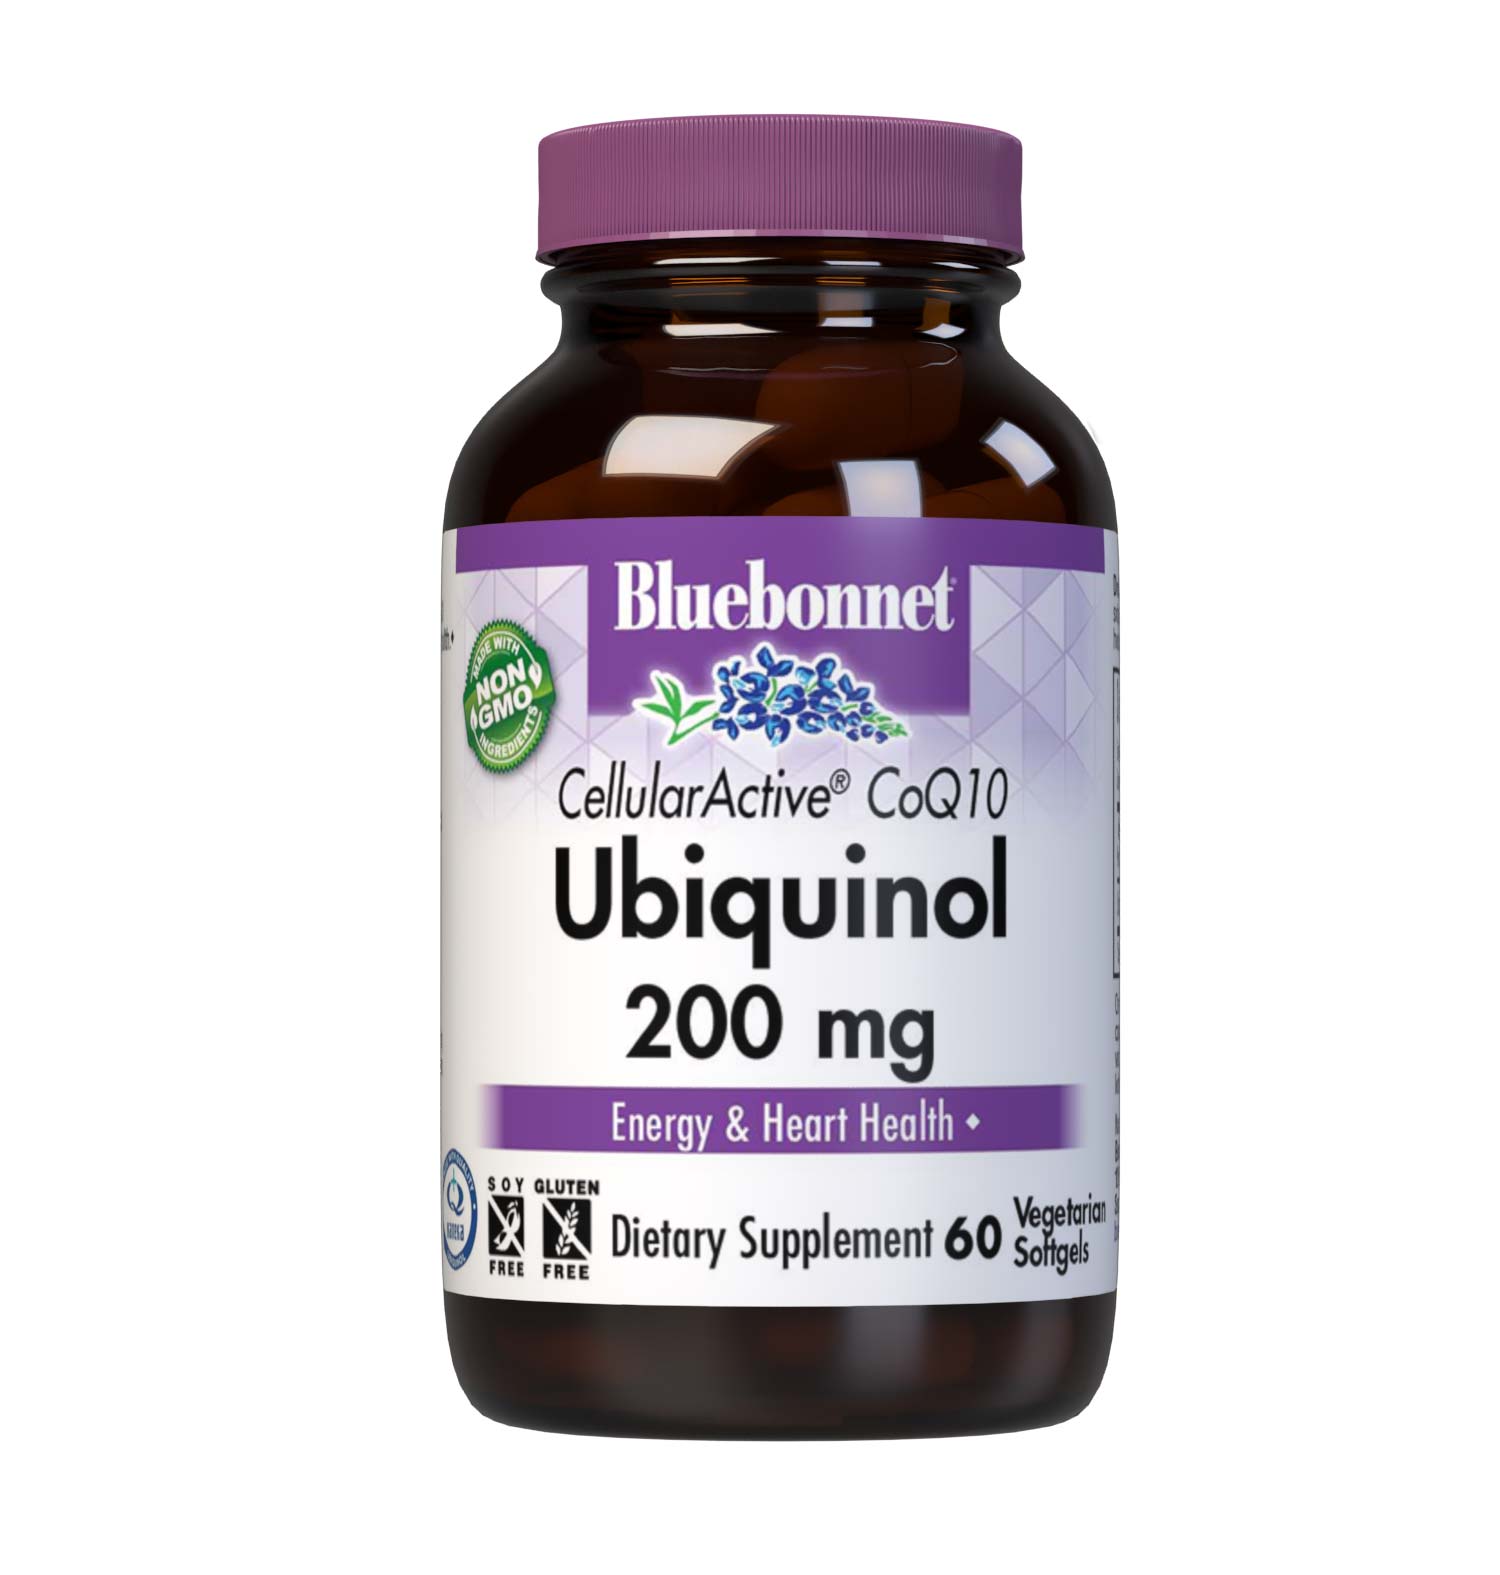 Bluebonnet’s Cellular Active CoQ10 Ubiquinol 60 Vegetarian Softgels are formulated with 200 mg of the active antioxidant form of CoQ10 (ubiquinol), which may support energy levels and heart health. #size_60 count